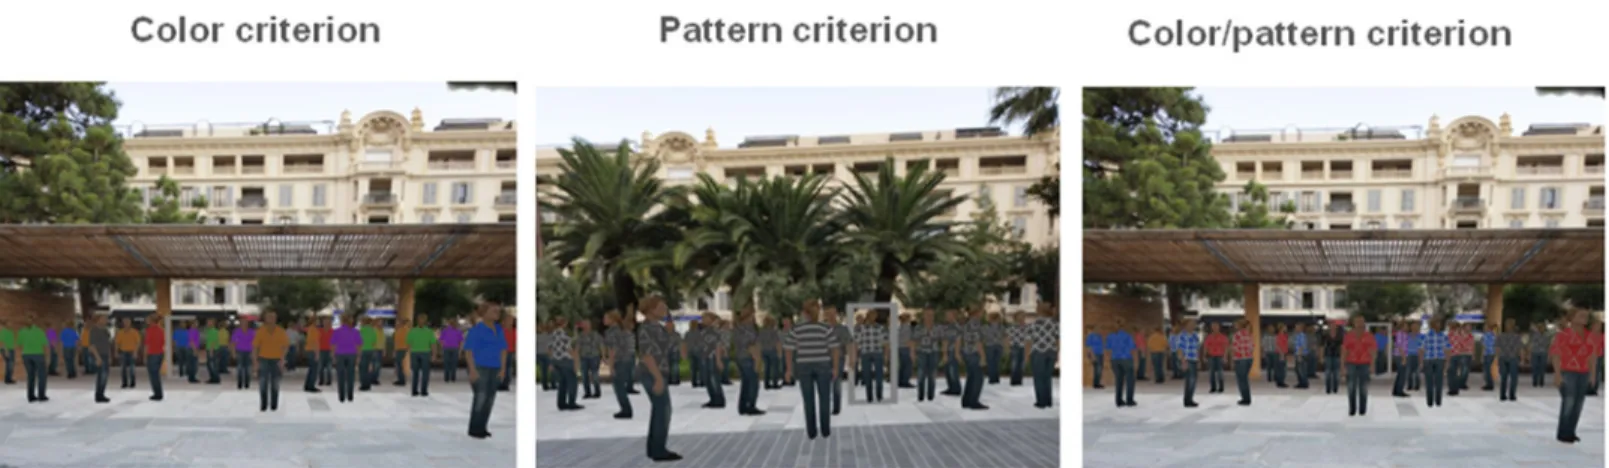 Fig 2. Examples of stimuli employed in the attentional task. Participants were asked to find five characters corresponding to specific criteria among a crowd of distracters.